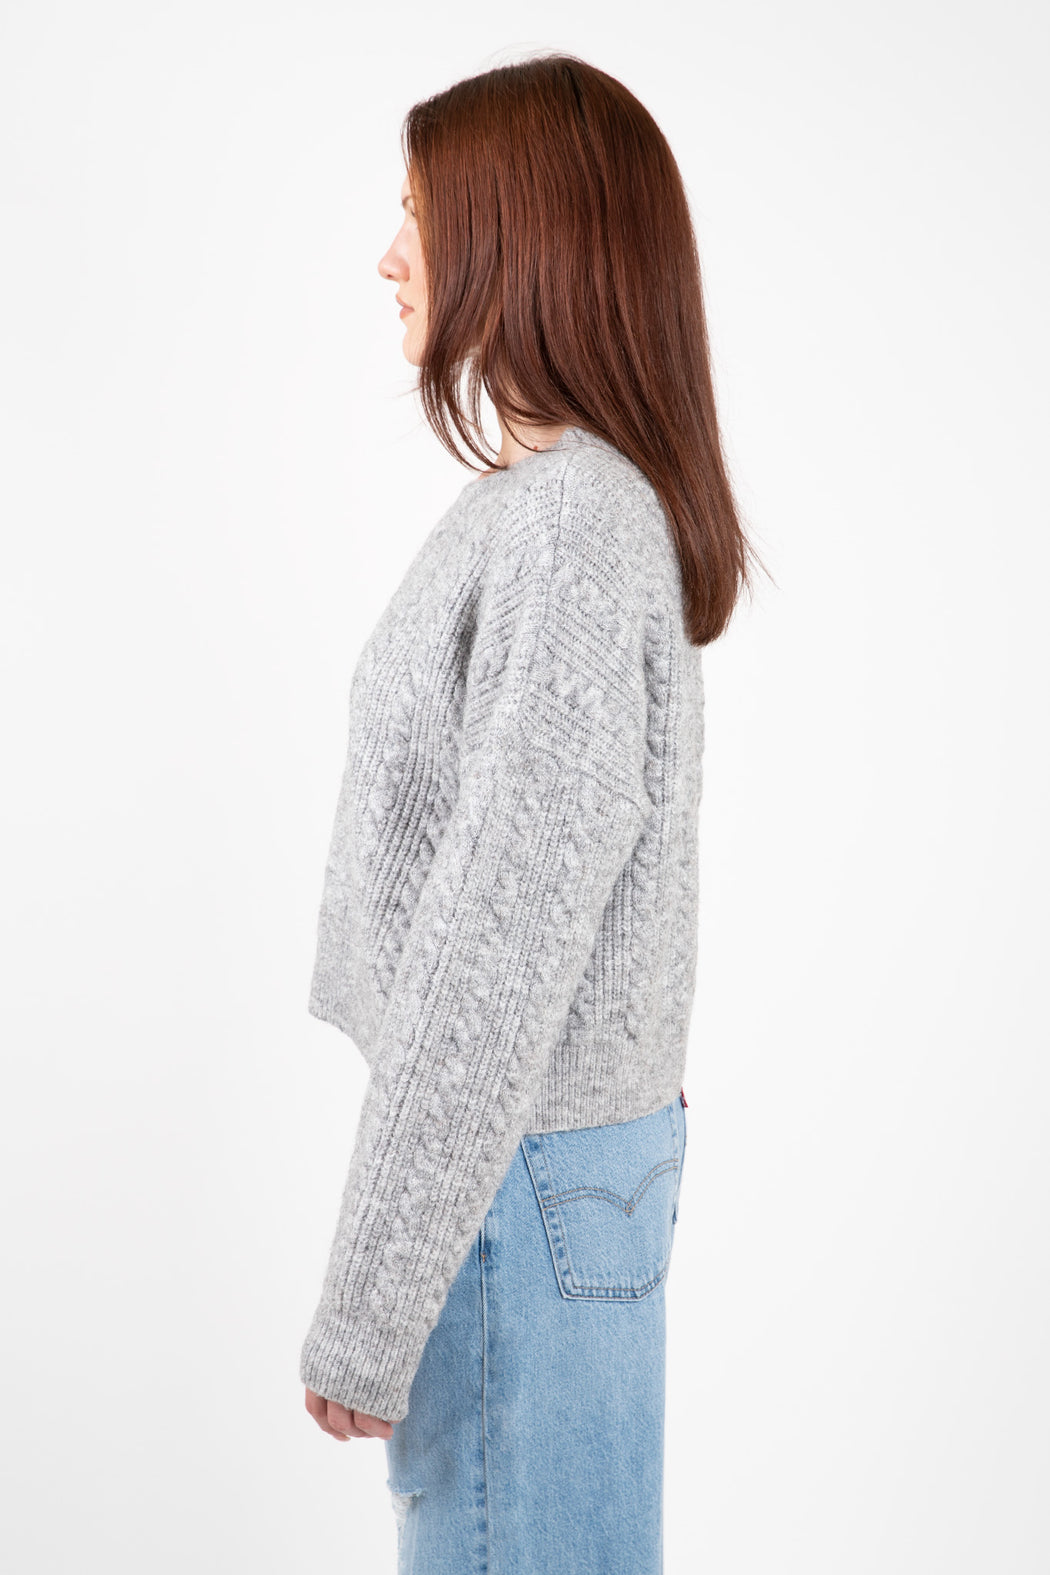 Lyla-Luxe-Addie-Cable-Sweater-Light-Grey